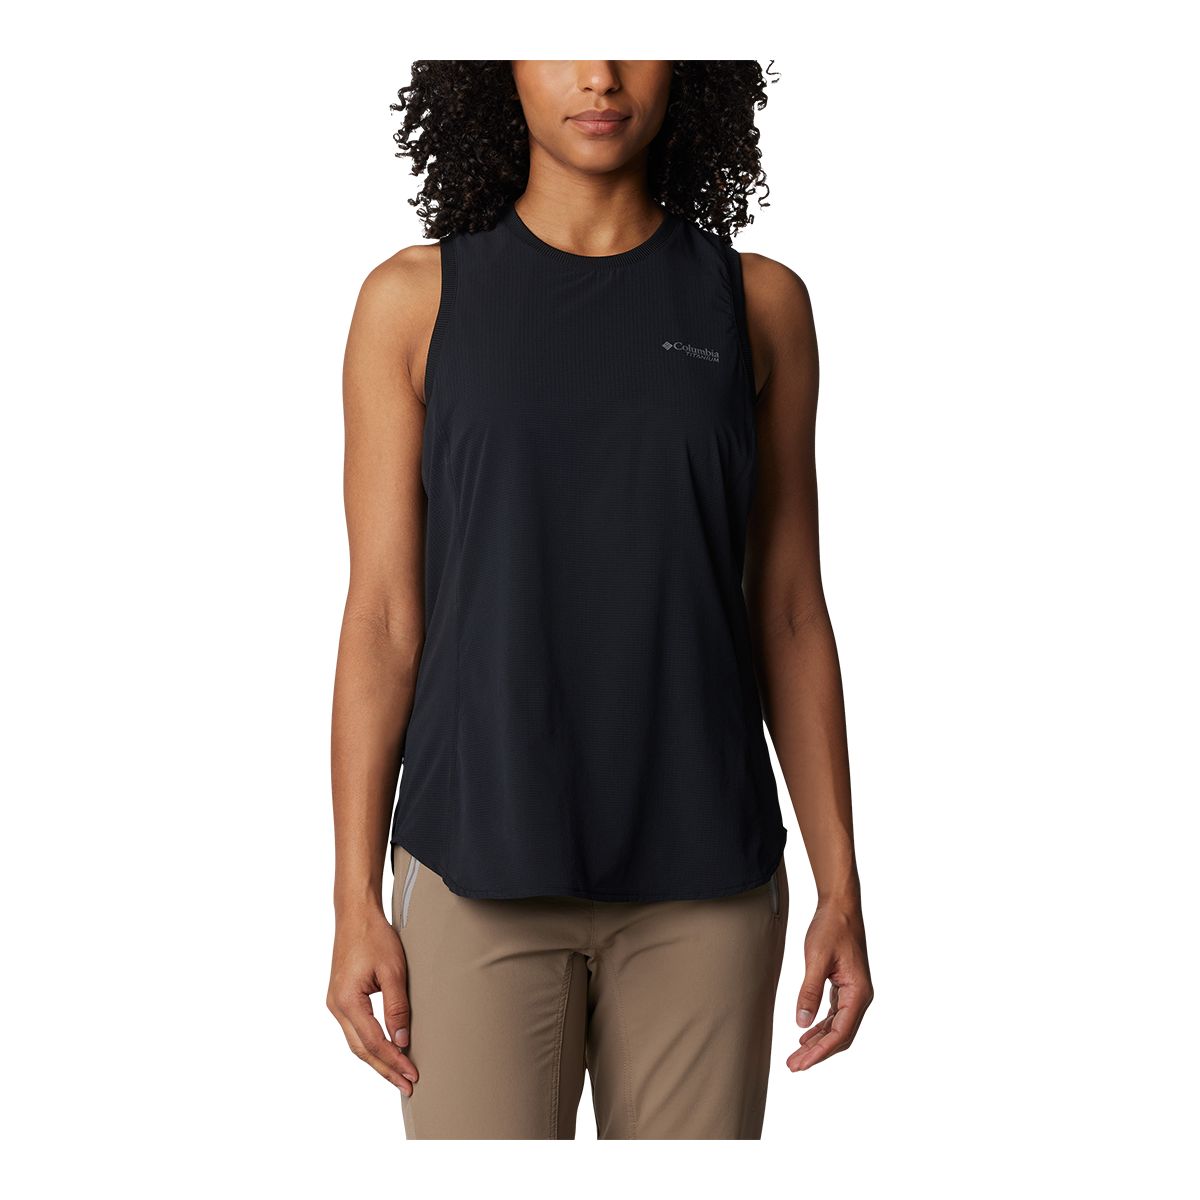 Image of Columbia Women's Cirque River™ Support Tank